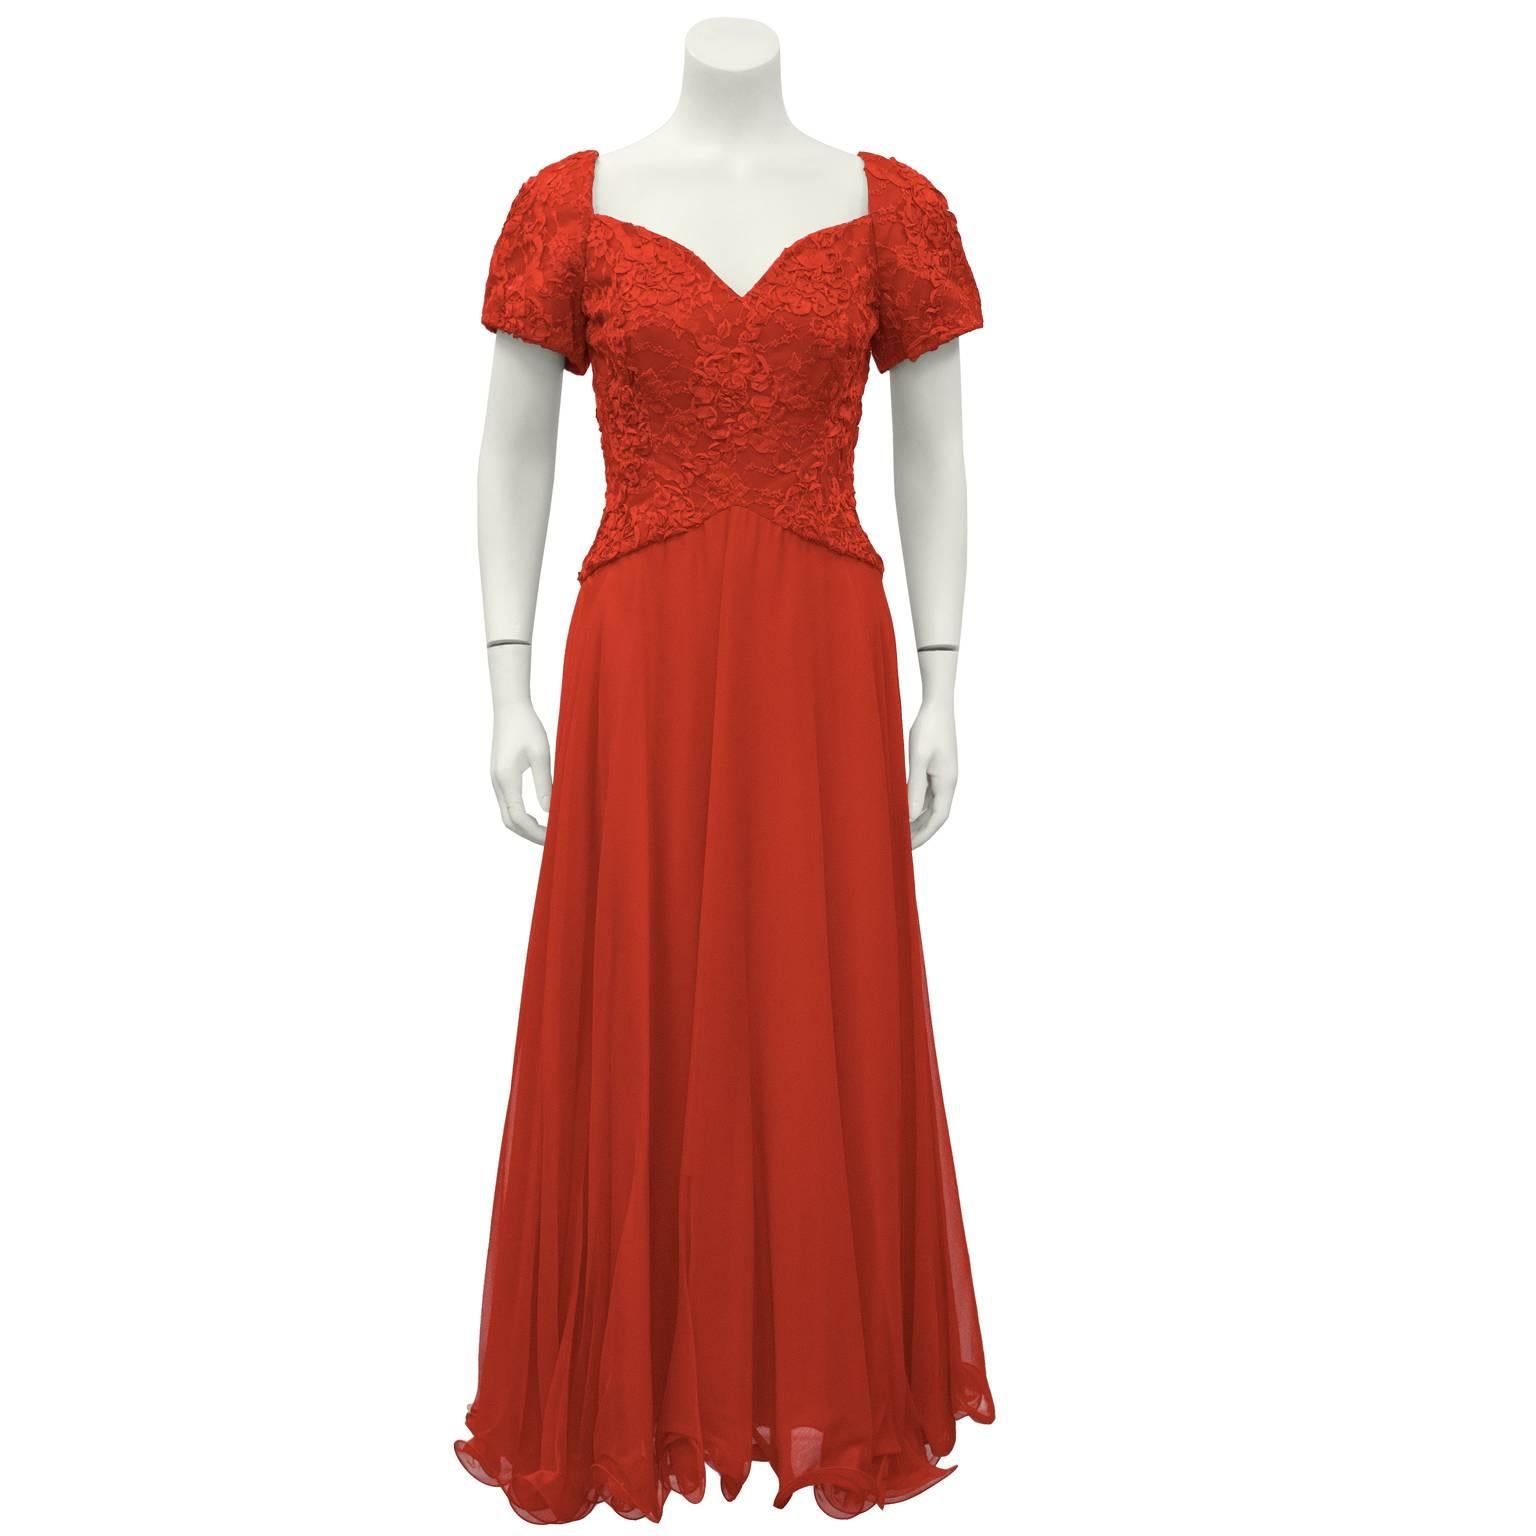 Scaasi, never worn, red lace and satin gown with matching jacket from the 1980's. Dress has sweetheart neckline, lace bodice and short sleeves. The chiffon layered skirt falls from the natural waist and is finished with a ruffled horsehair under